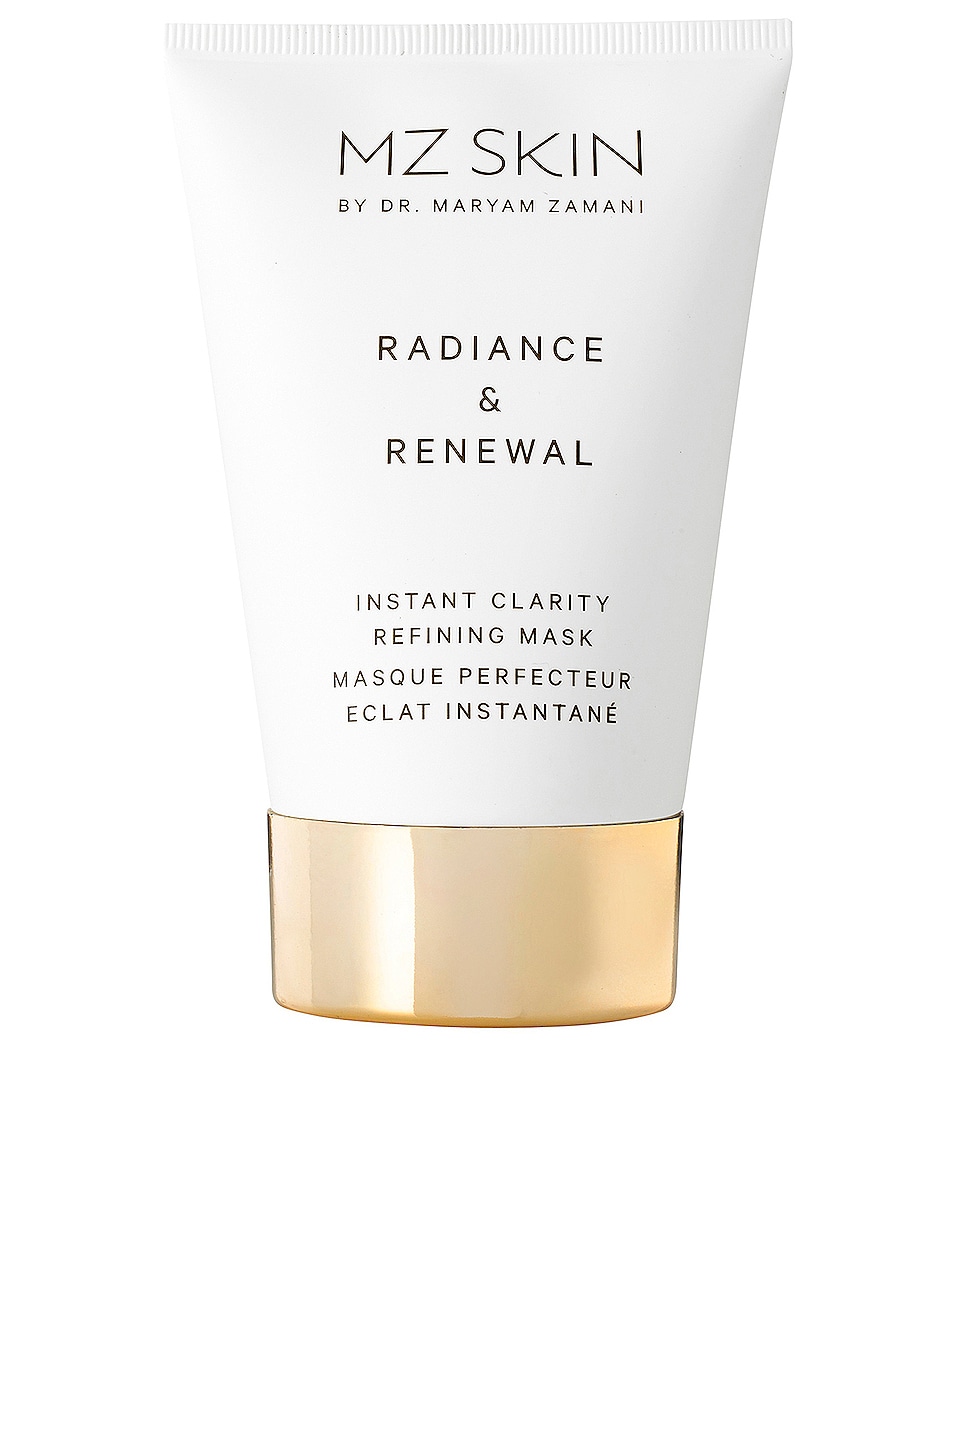 Radiance & Renewal Instant Clarity Refining Mask in Beauty: NA